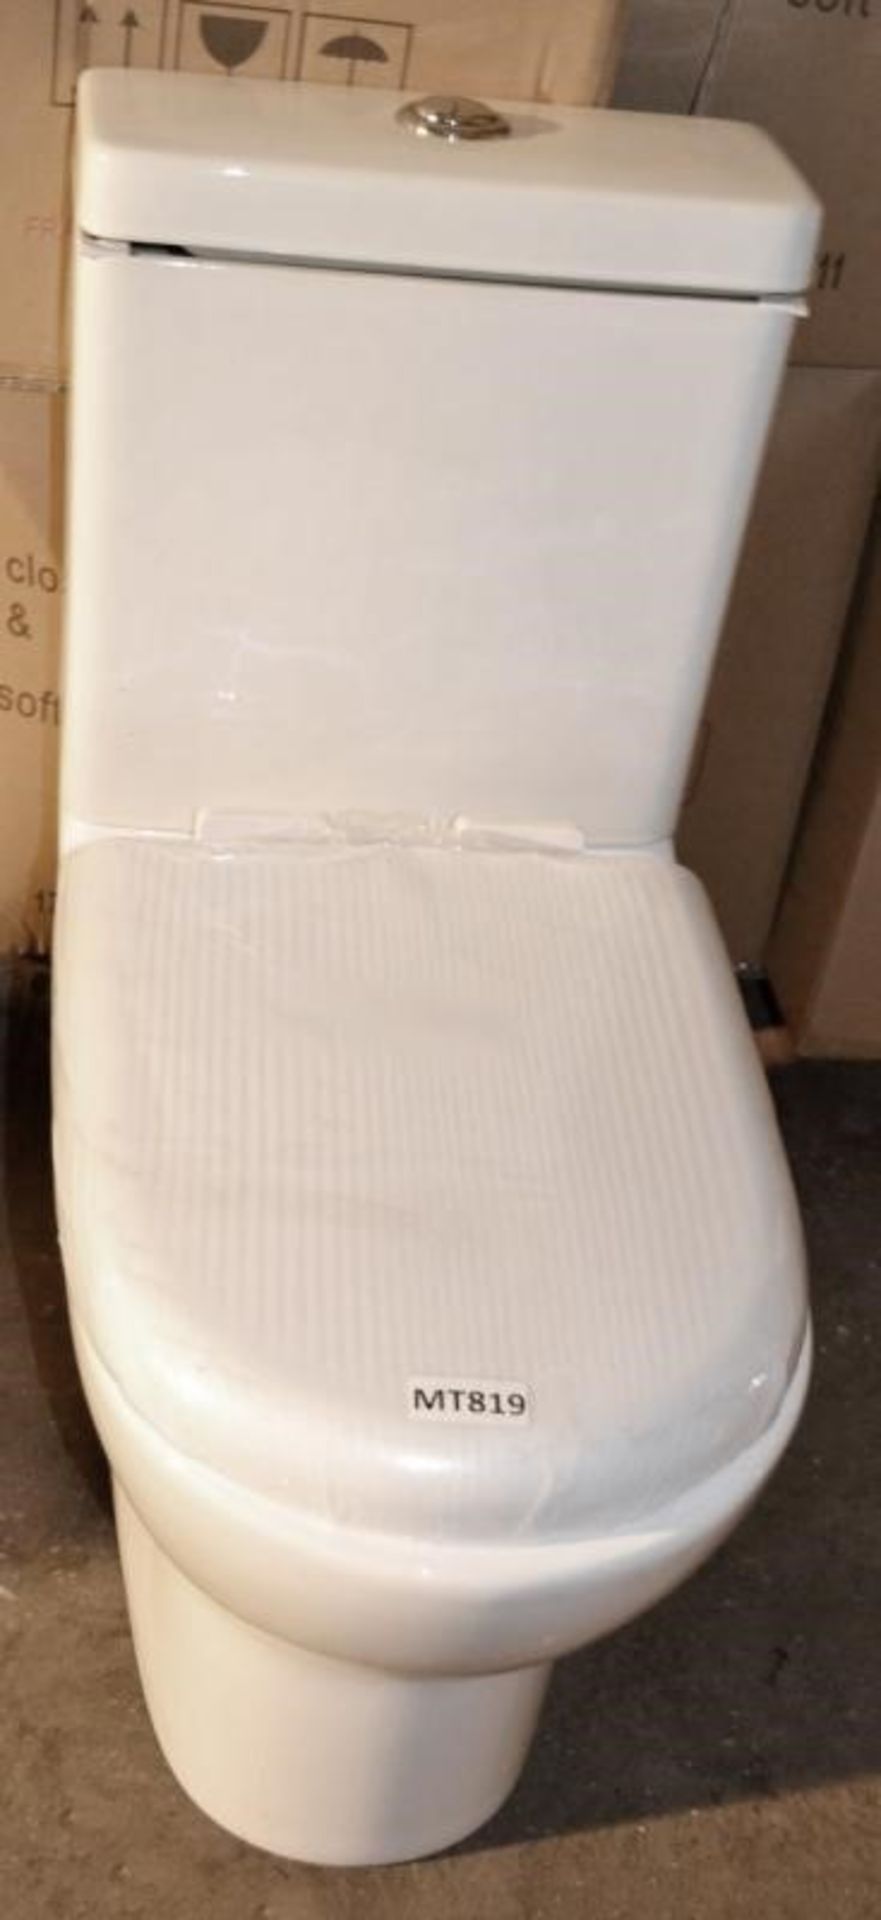 1 x Close Coupled Toilet Pan With Soft Close Toilet Seat And Cistern (Inc. Fittings) - Brand New Box - Image 5 of 10